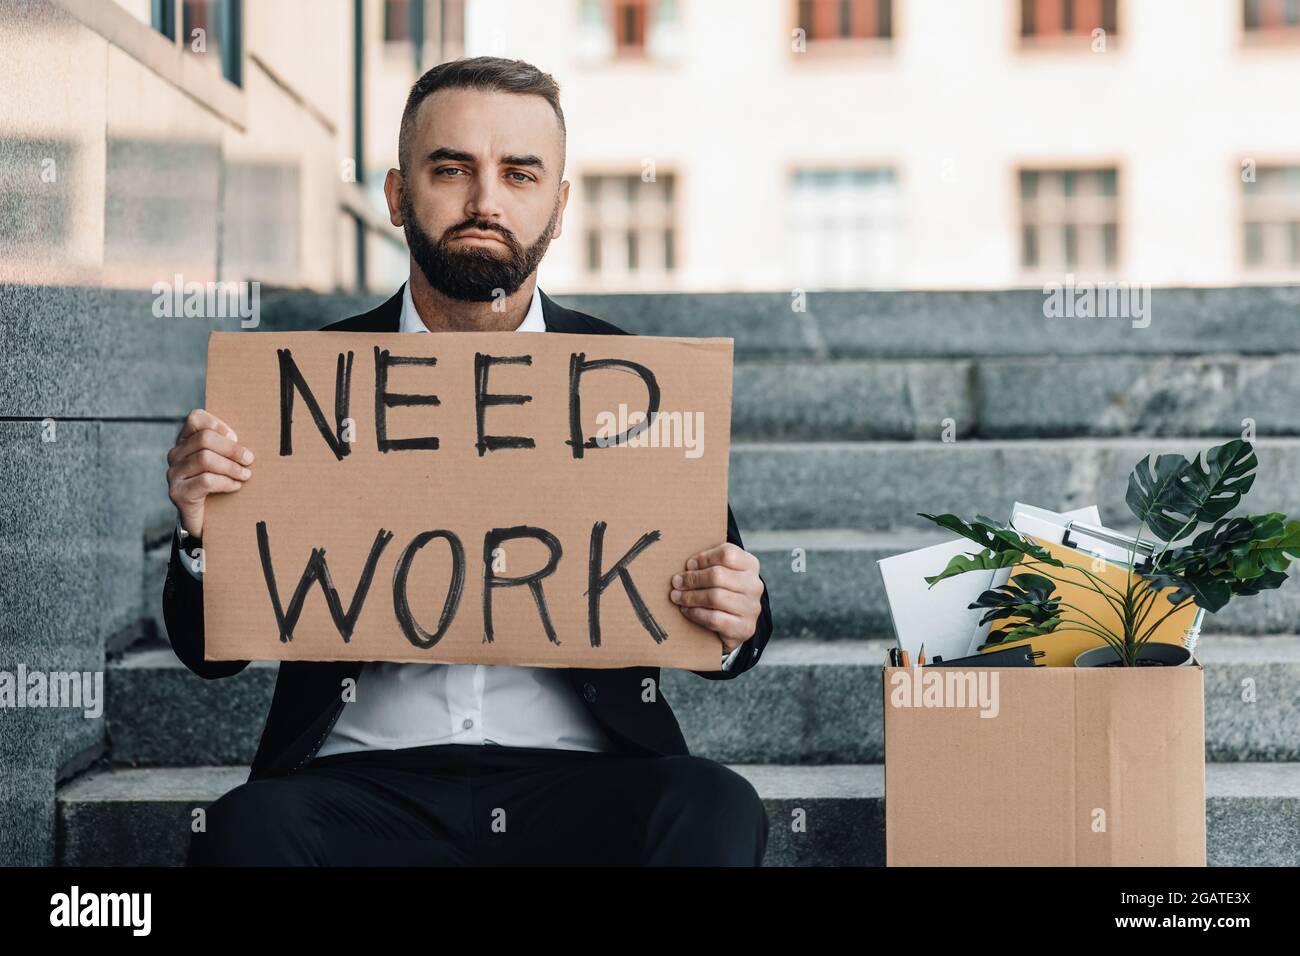 Need work. Depressed mature businessman sitting on stairs with poster and box of personal stuff, got fired due to coronavirus crisis, copy space. Unem Stock Photo